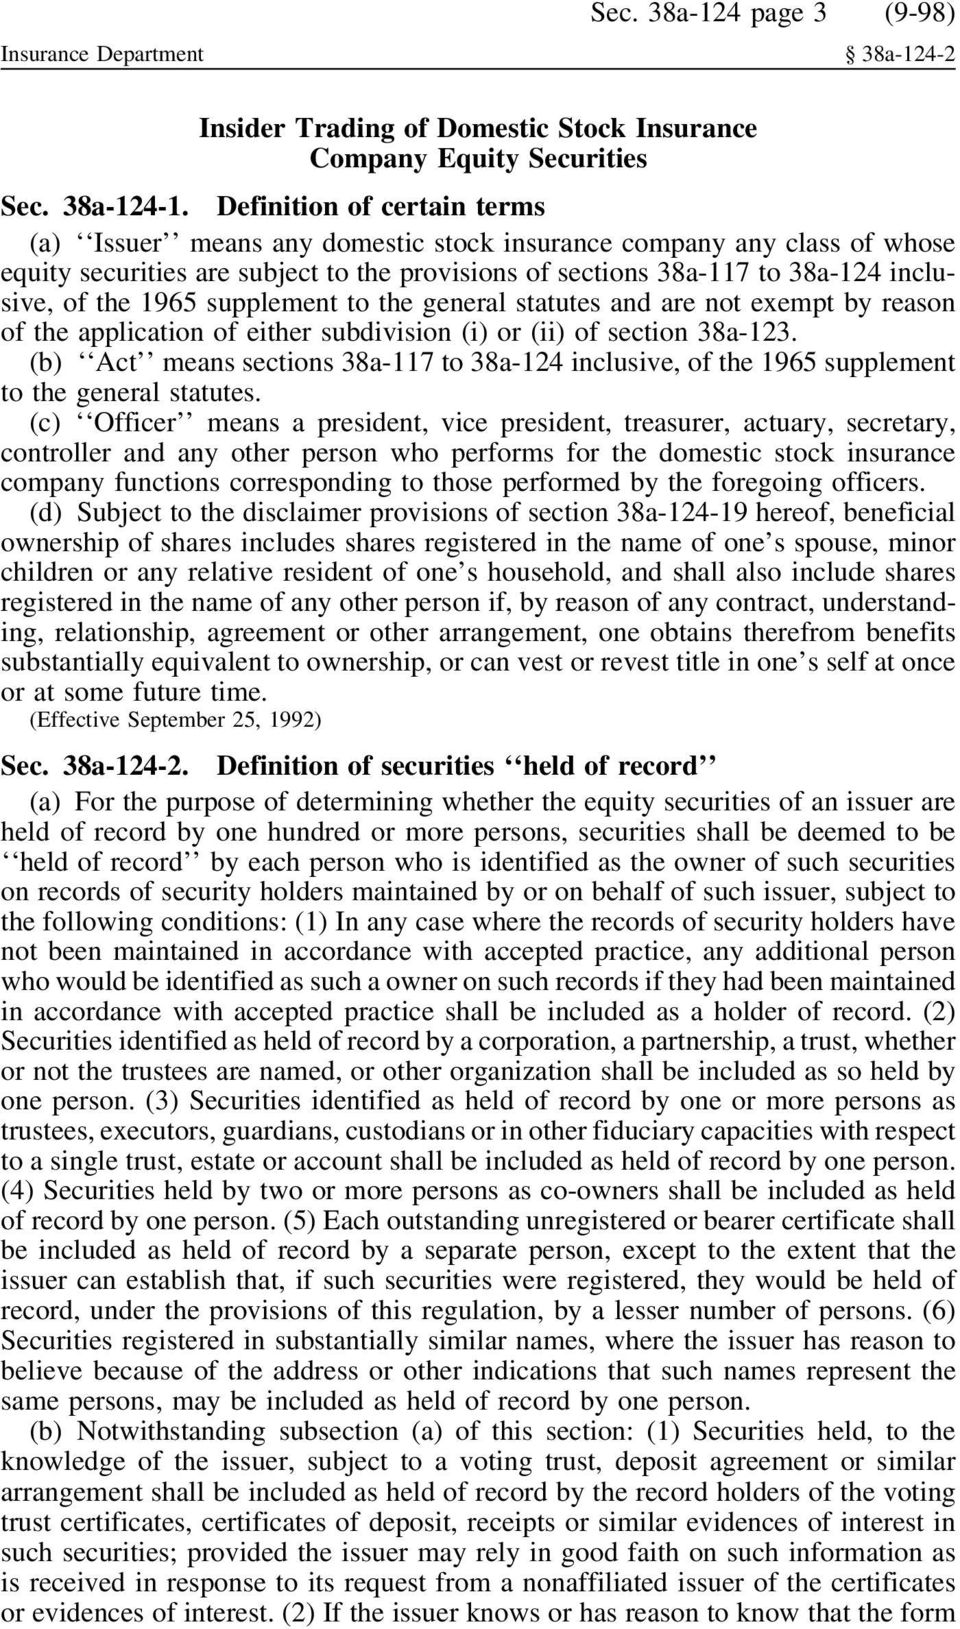 1965 supplement to the general statutes and are not exempt by reason of the application of either subdivision (i) or (ii) of section 38a-123.